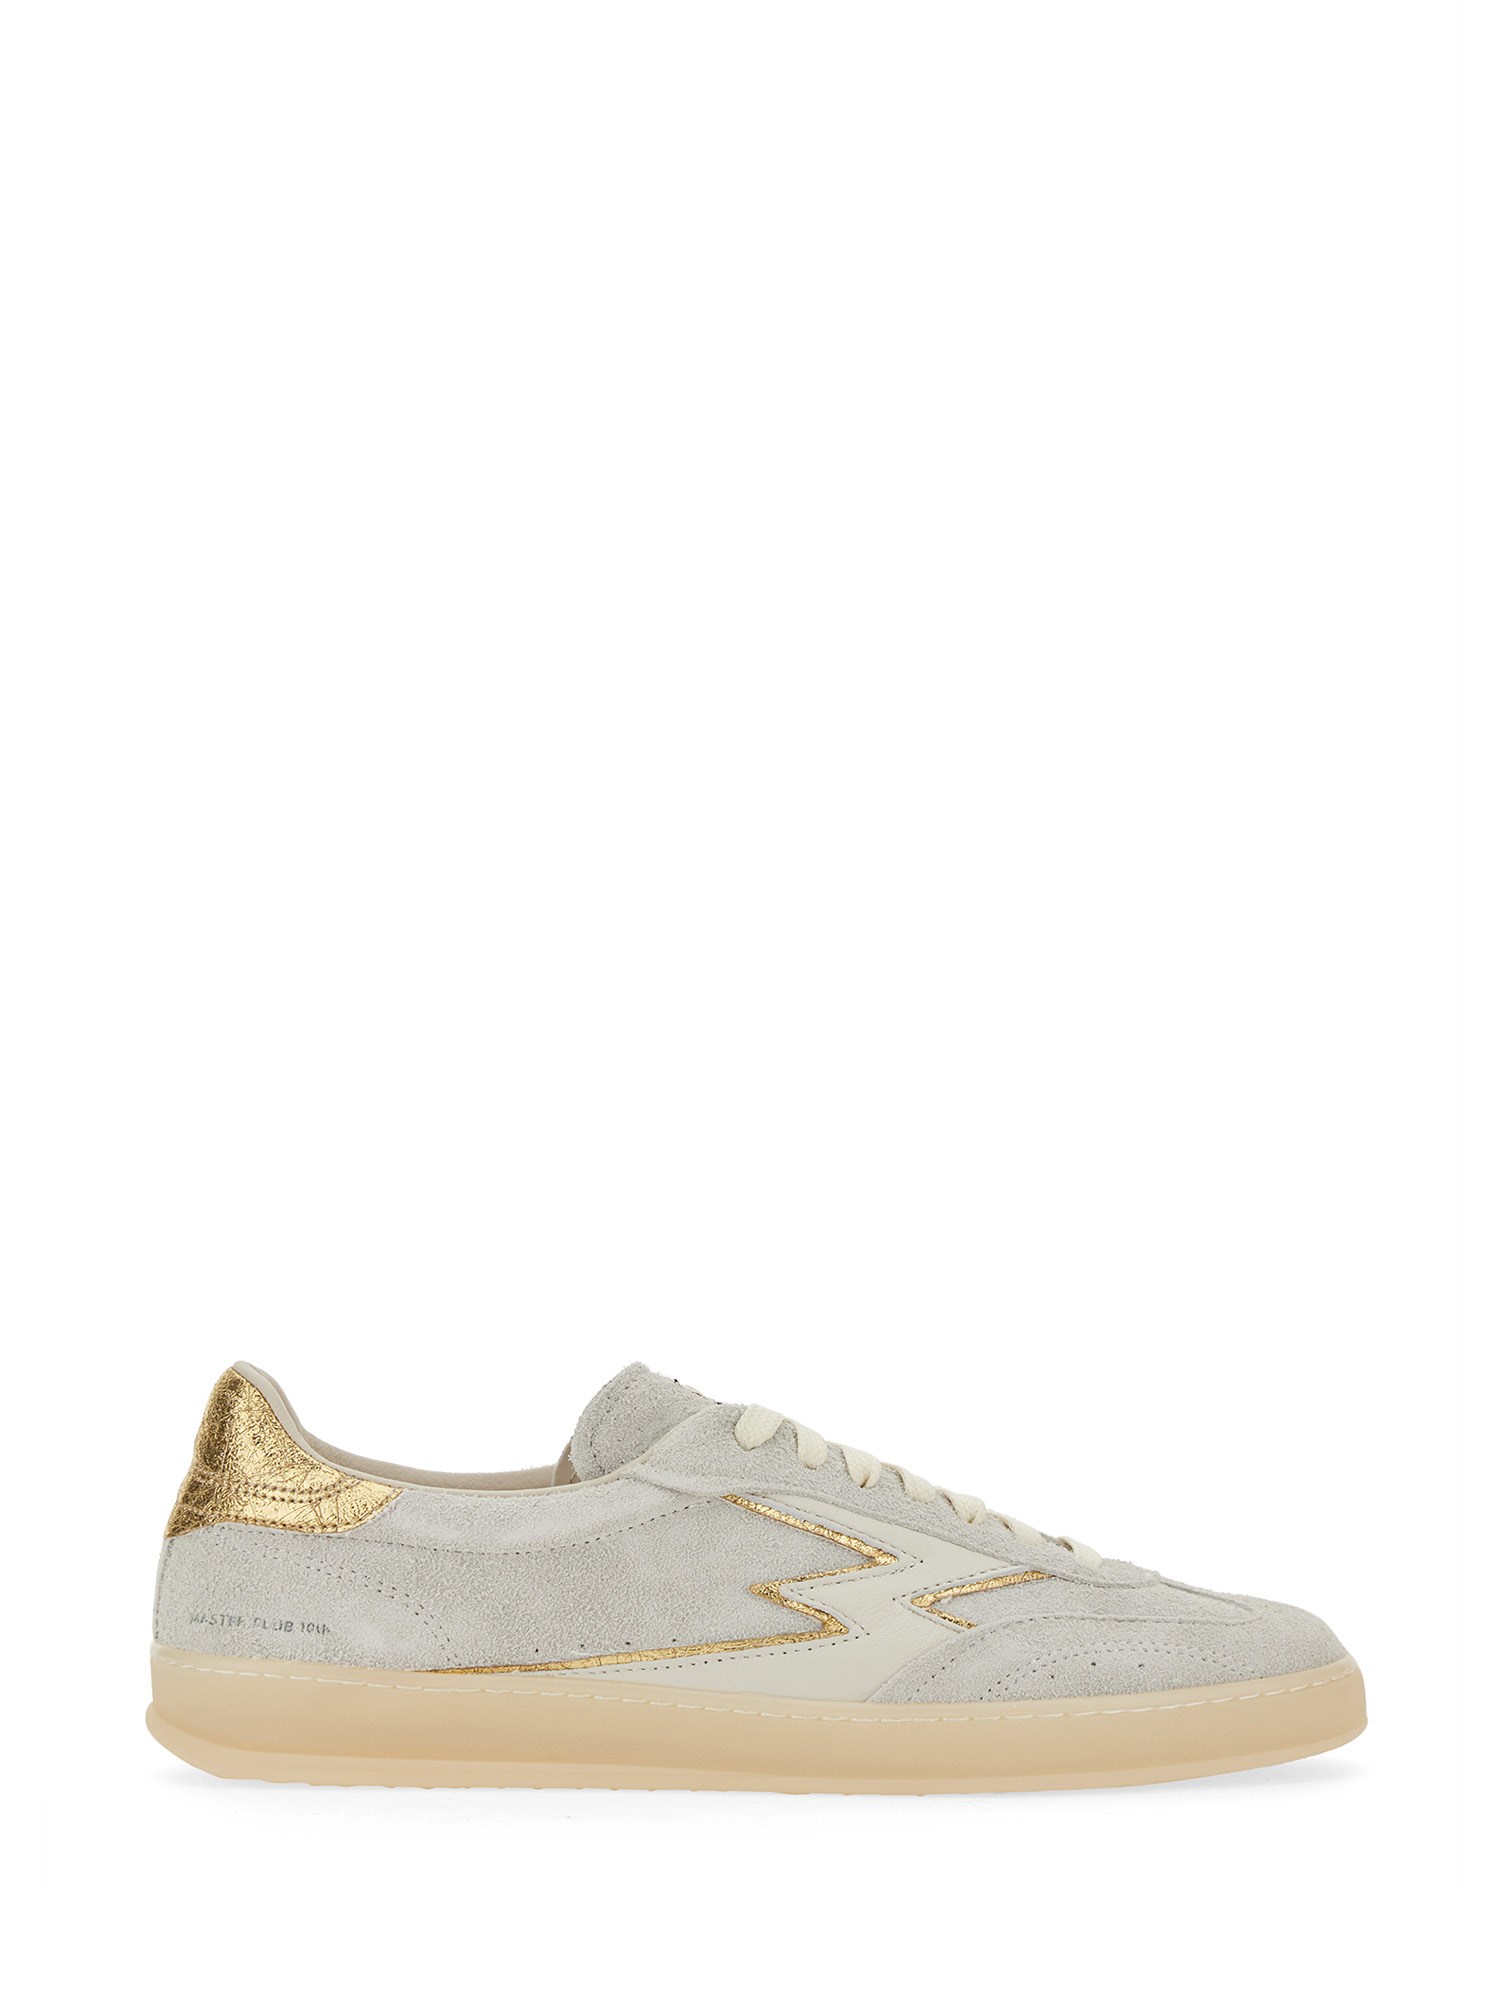 moaconcept moaconcept suede "club" sneakers